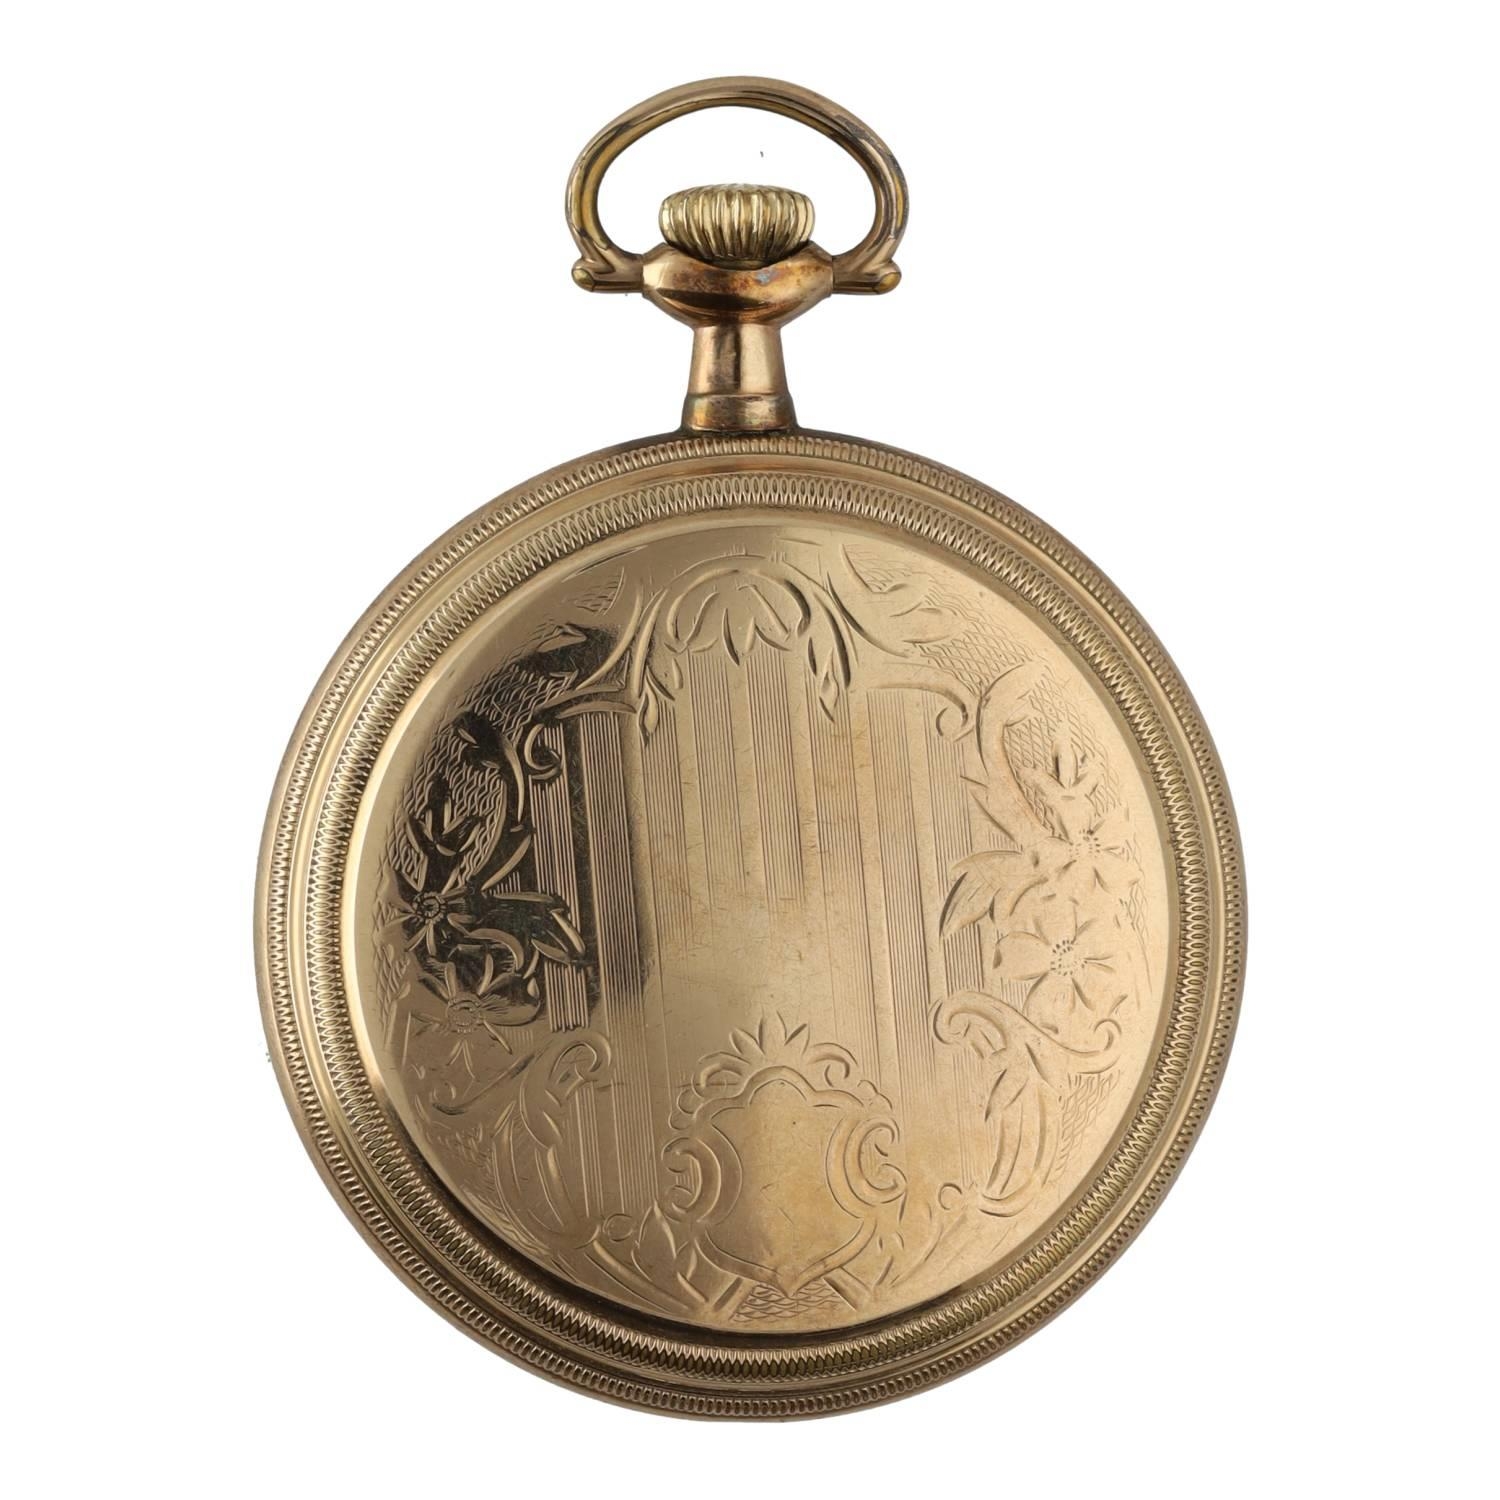 Hamilton 'Railway Special' gold plated lever set pocket watch, circa 1948, serial no. C298581, - Image 4 of 4